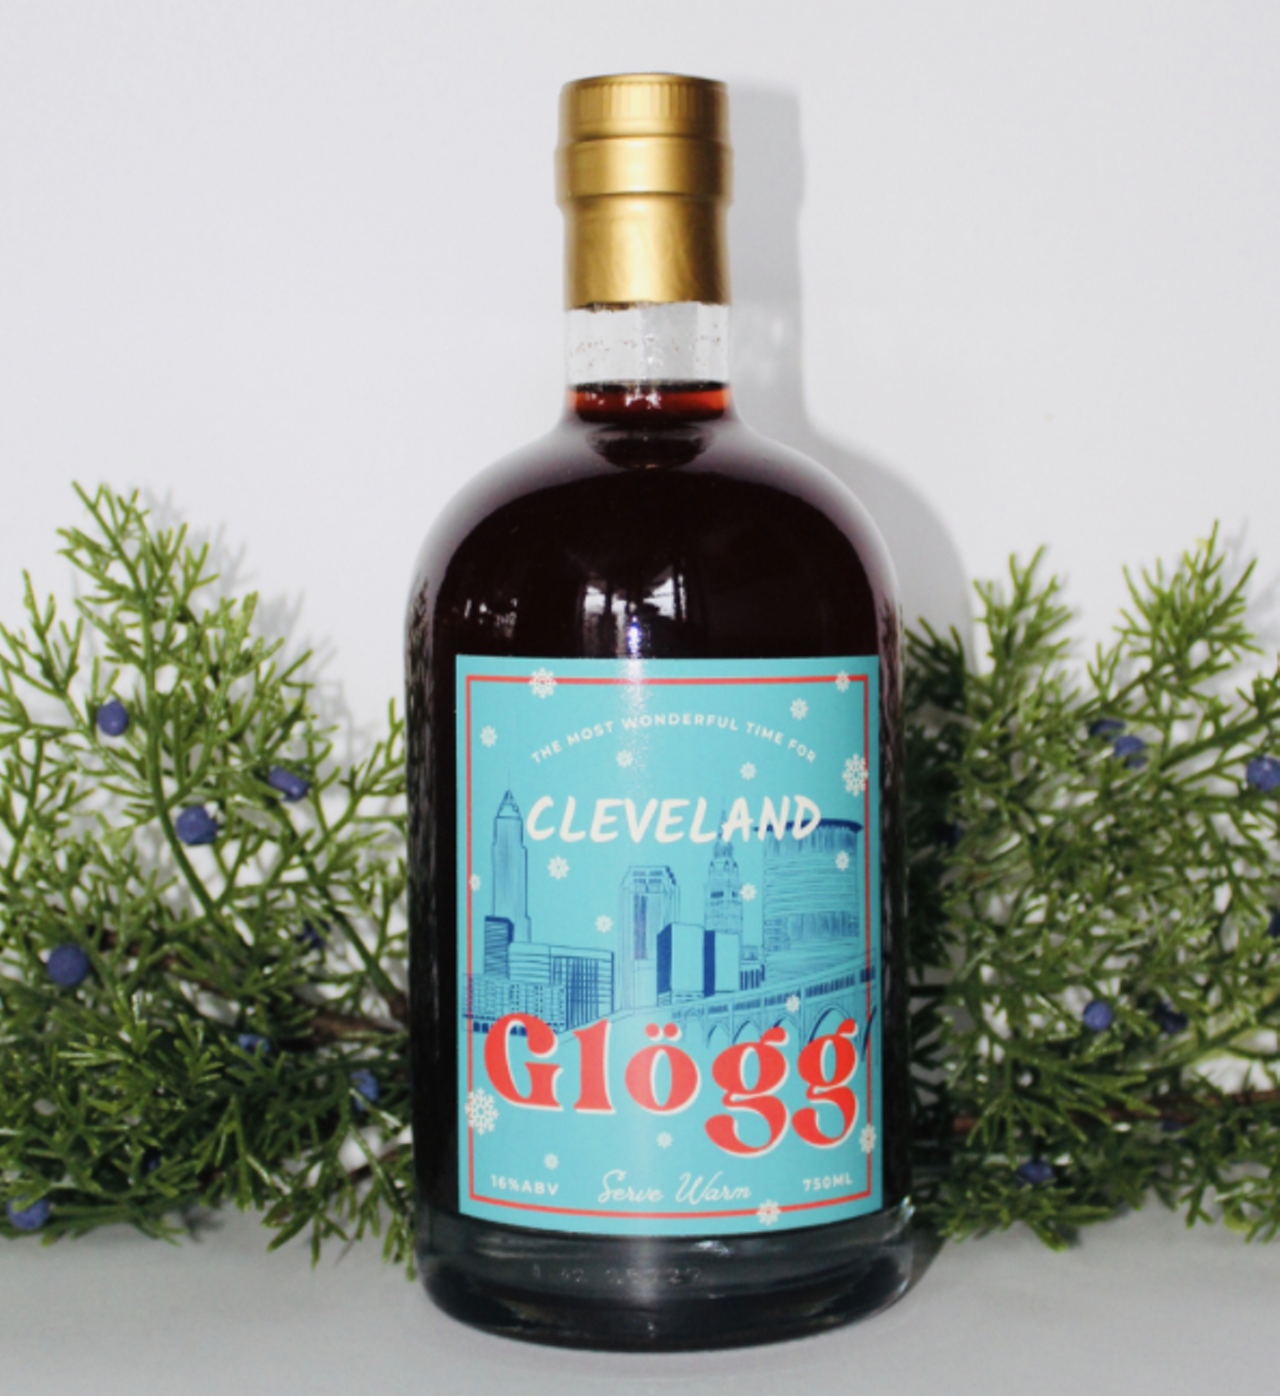 Cleveland Glogg 
The three sisters that own StoneWater Golf Club sell this drink that has history dating 500 years. Glogg is a Swedish mulled wine made with cinnamon, raisins, sugar, cloves, orange peel and more that is perfect to drink for the holidays.